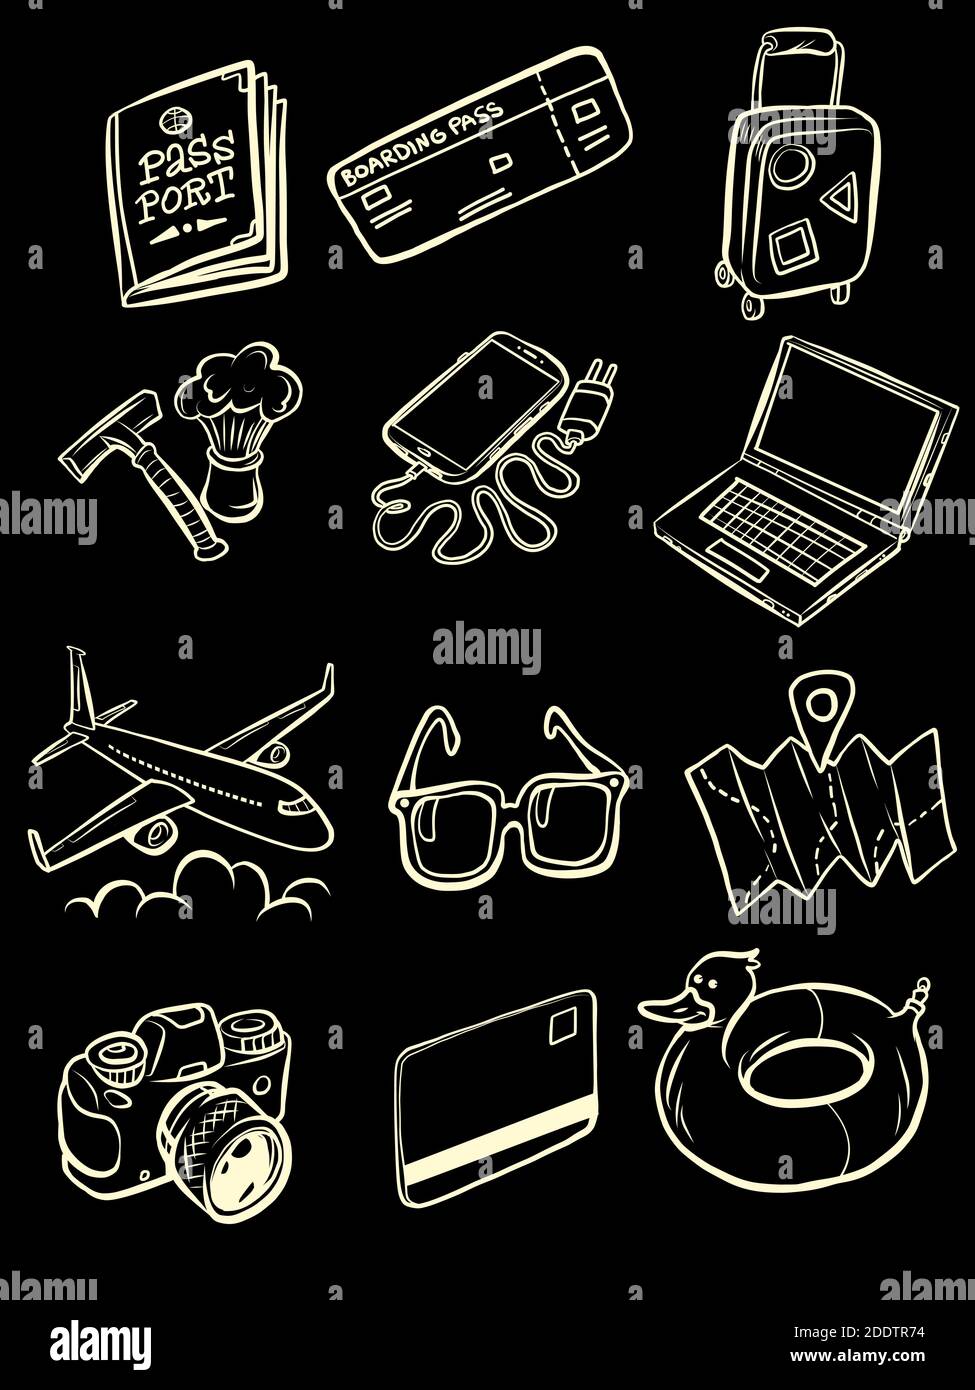 Travel tourism collection set icons symbols sketch hand drawing Stock Vector